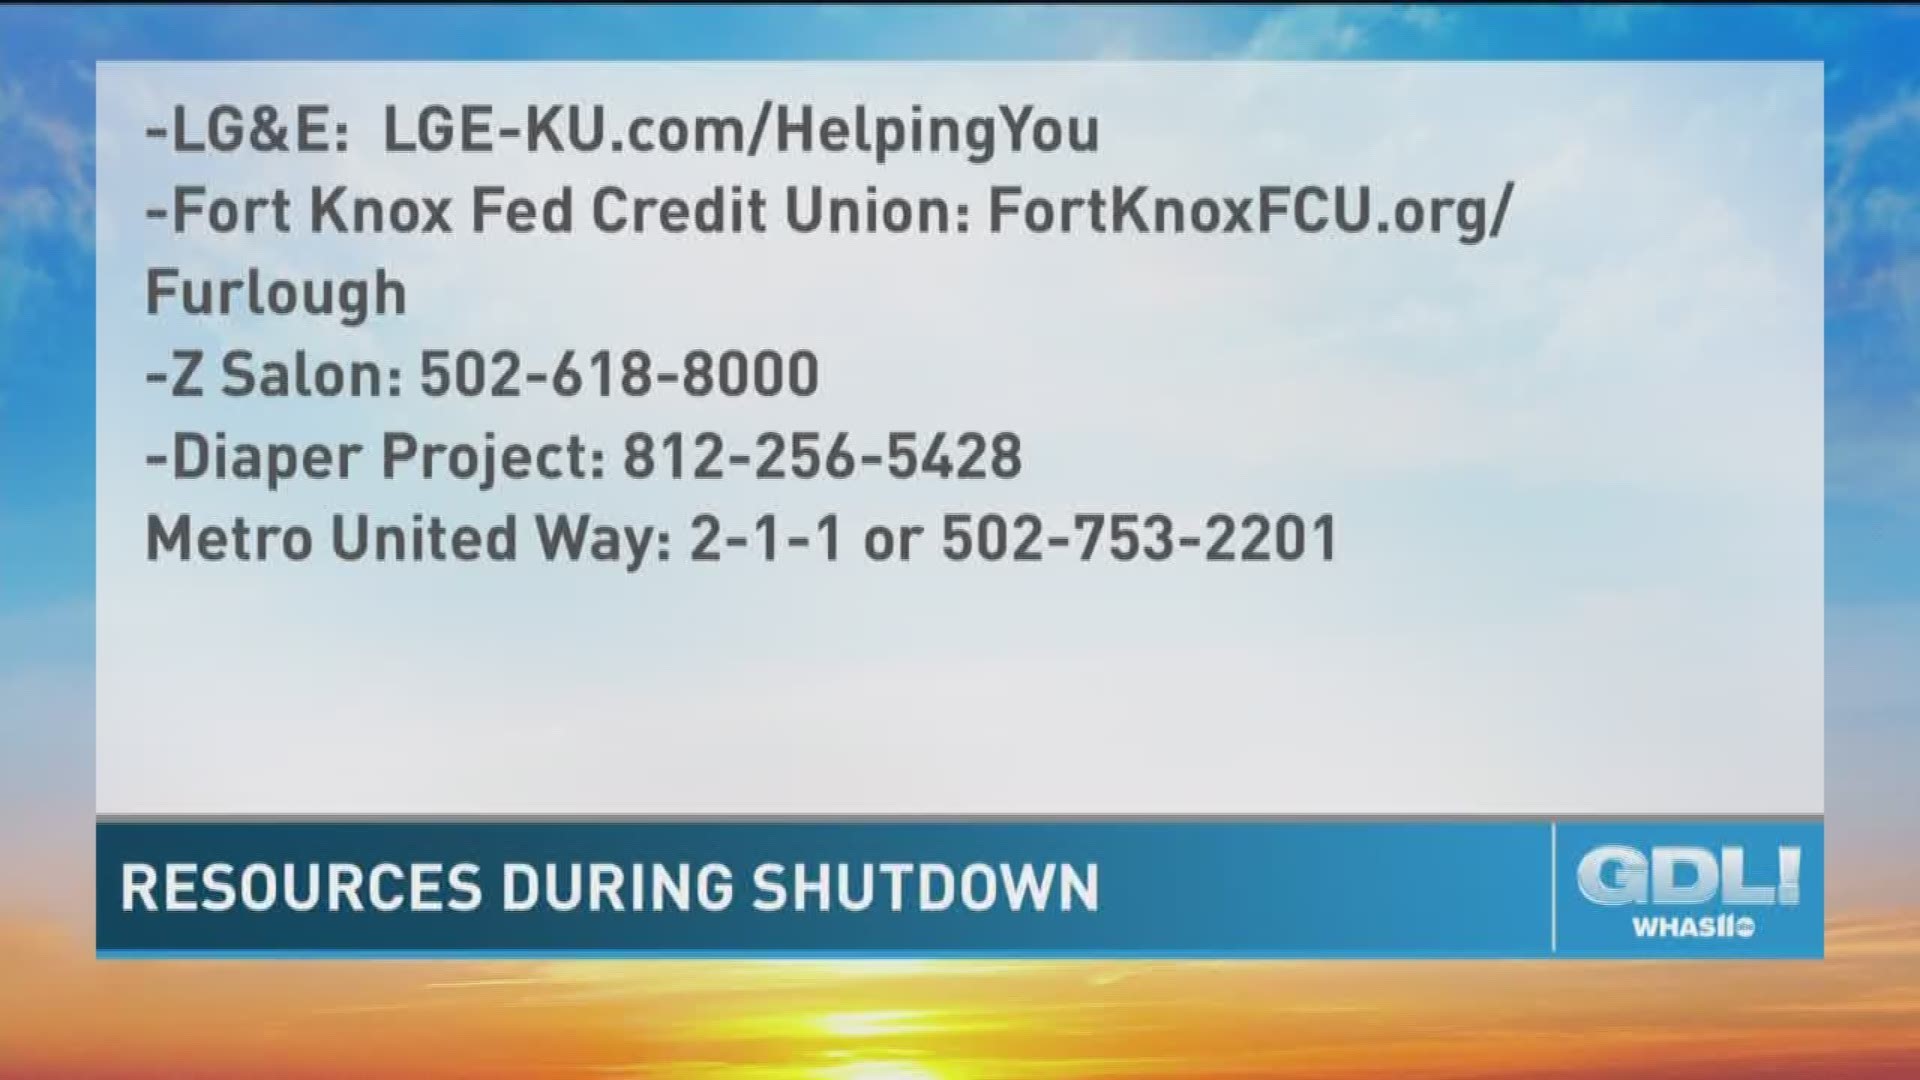 If you have been affected by the government shutdown, there are resources available to provide some relief.